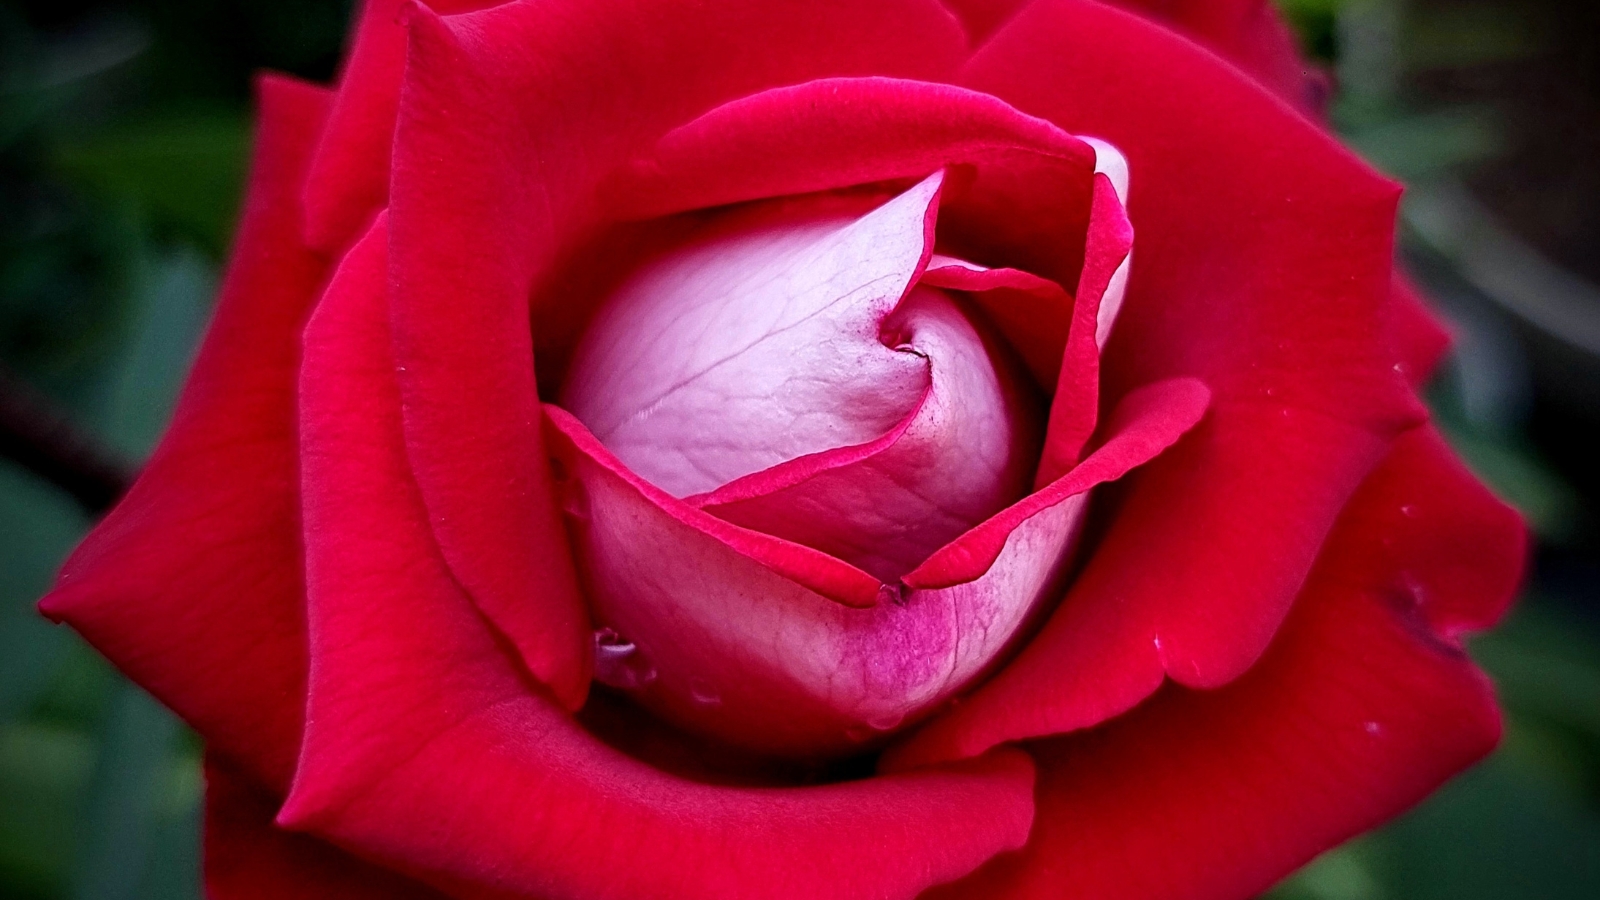 A close-up of a red 'Love' rose, their velvety texture inviting touch and admiration, a testament to nature's beauty and perfection.